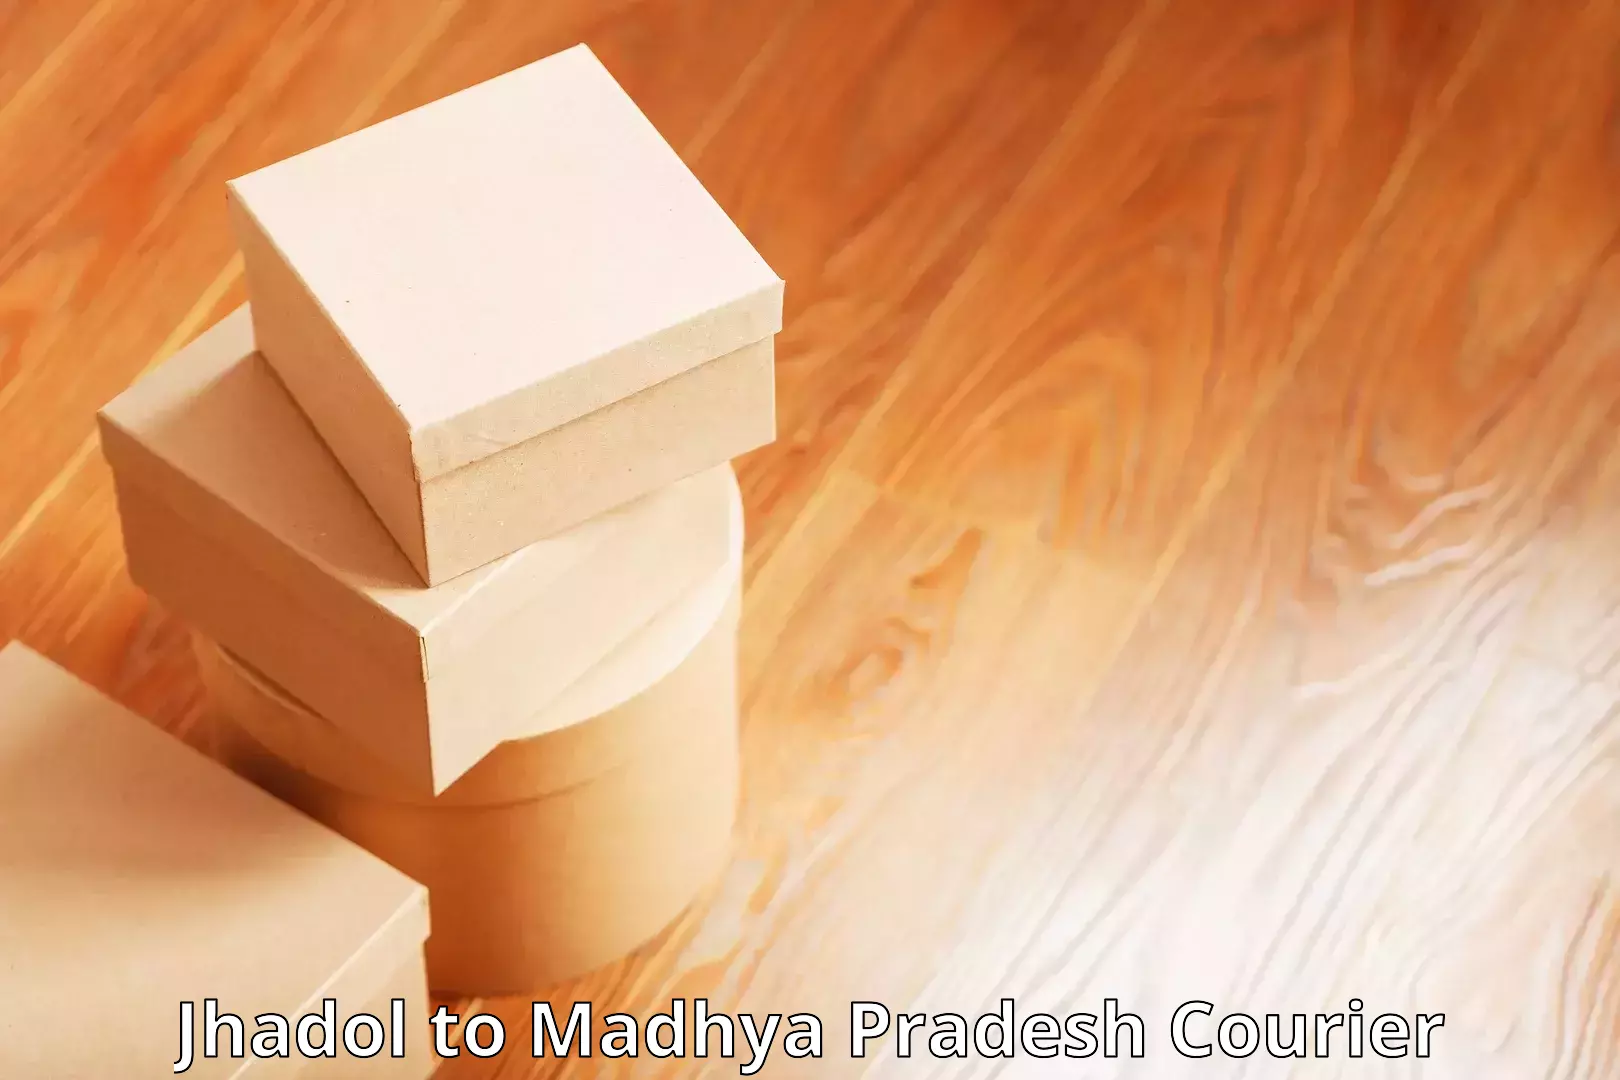 Reliable courier services in Jhadol to Vidisha